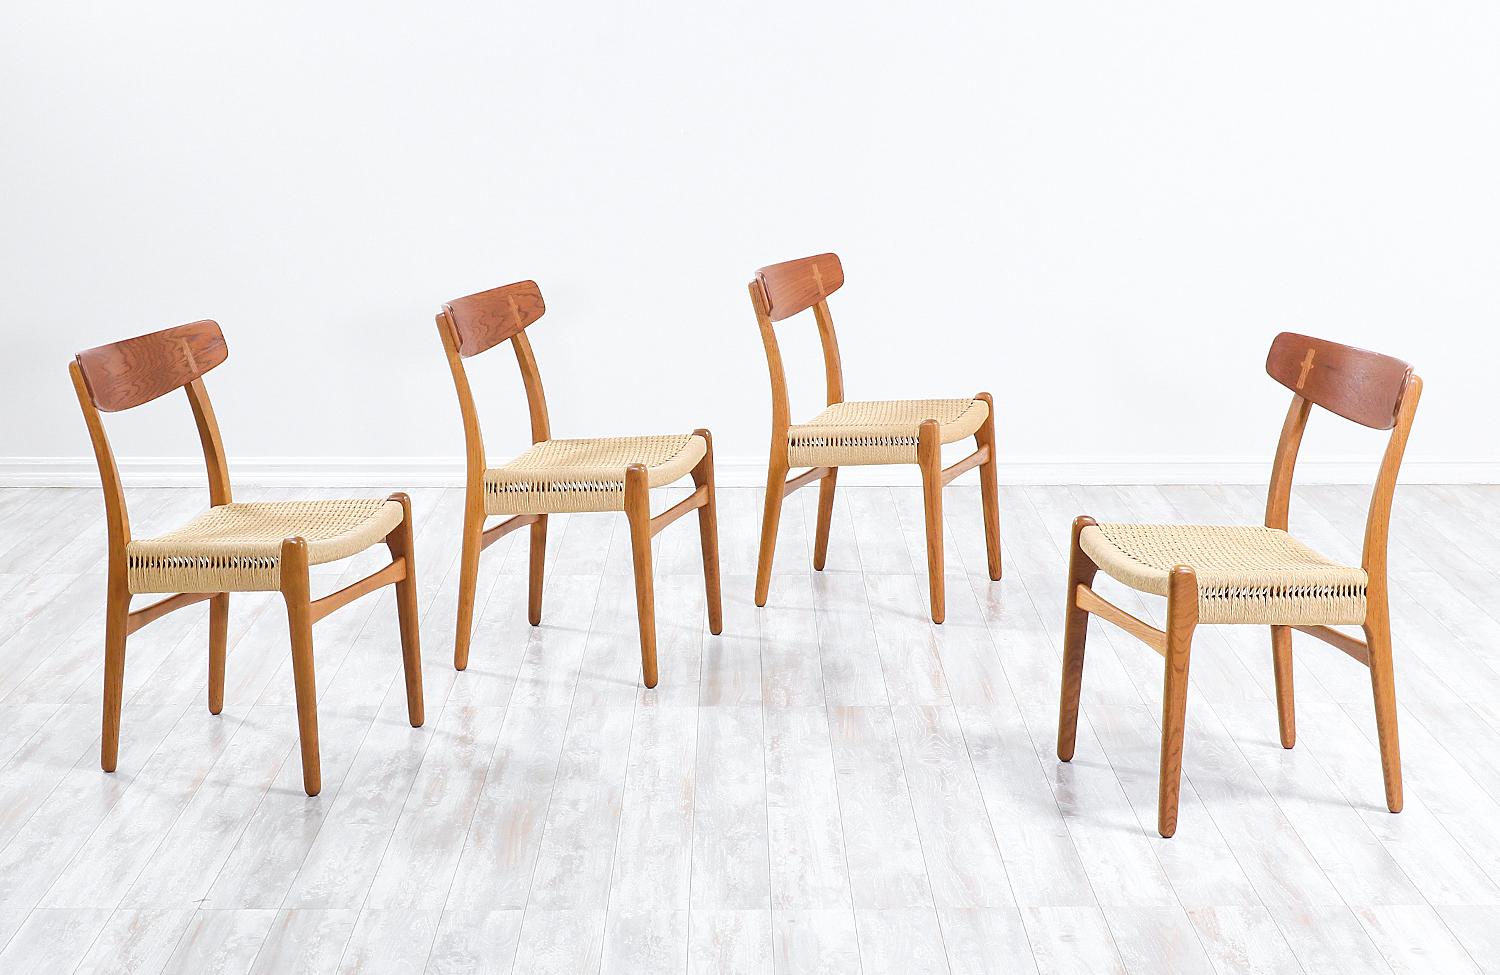 Set of four dining chairs designed by iconic Danish furniture designer Hans J. Wegner for Carl Hansen & Søn in Denmark c. 1950’s. The oak and teak wood frames are in great vintage condition with the Wegnerian joinery details in the backrest, while